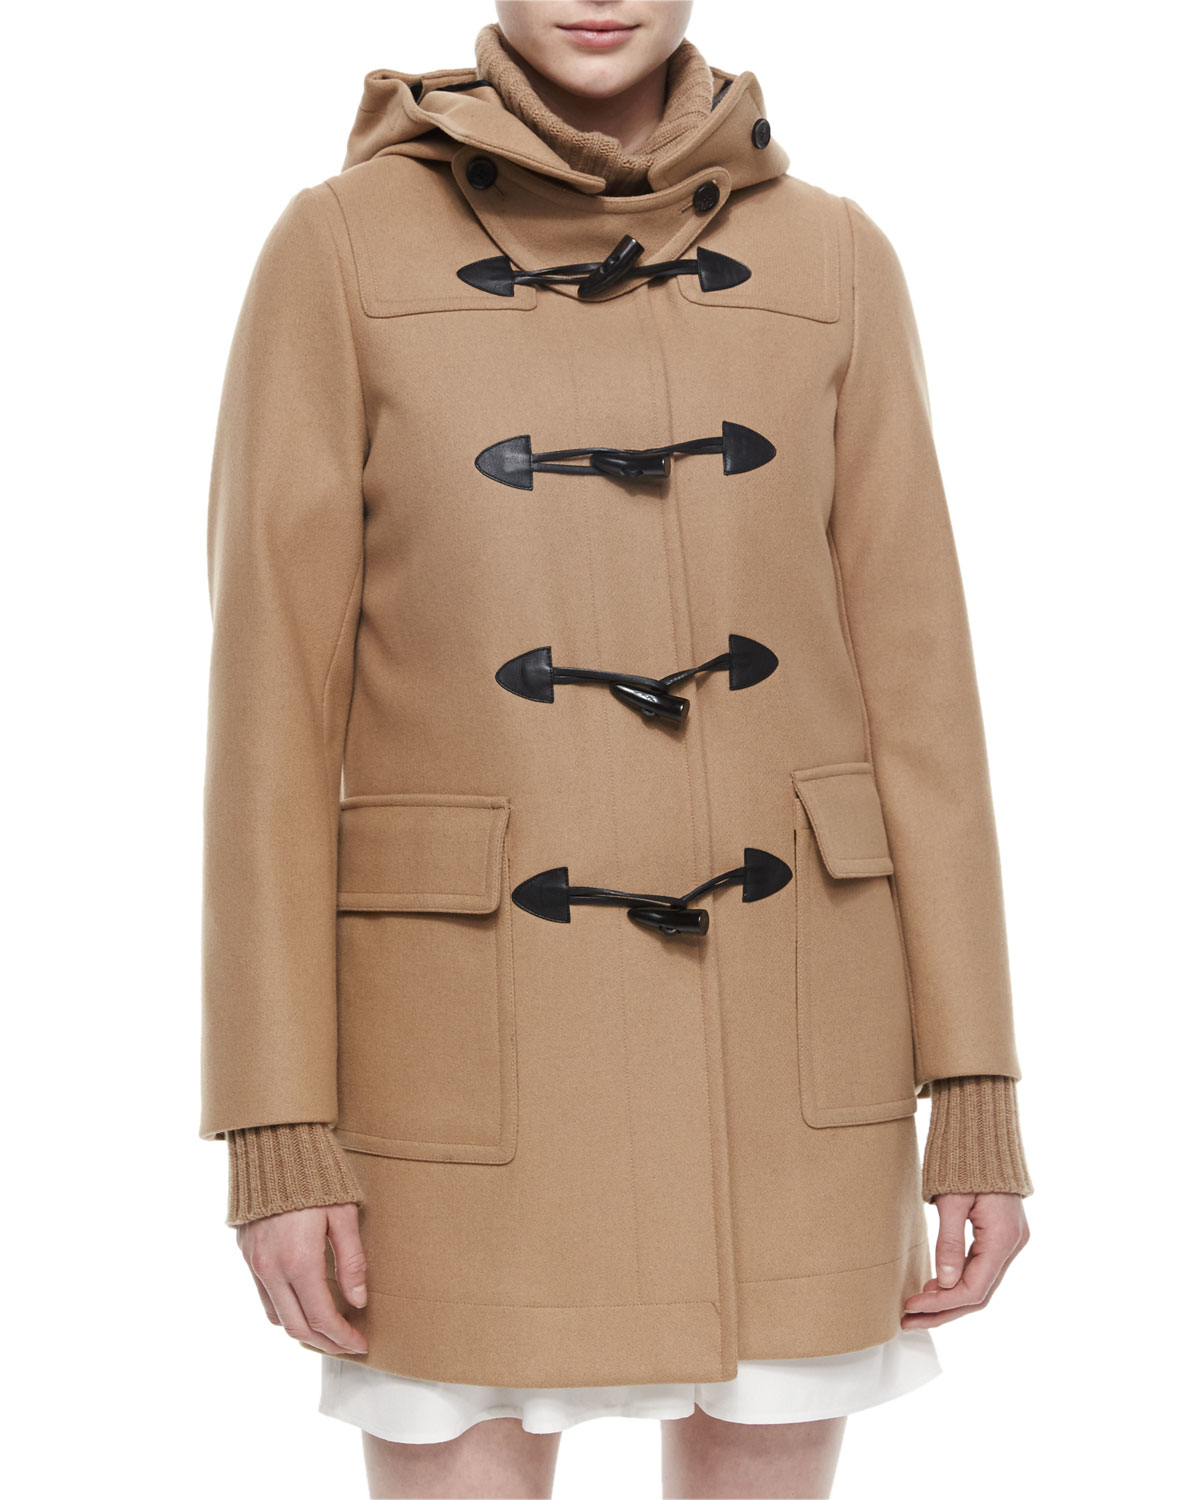 Belstaff Hooded Toggle-front Duffel Coat in Camel/Black (Natural) - Lyst